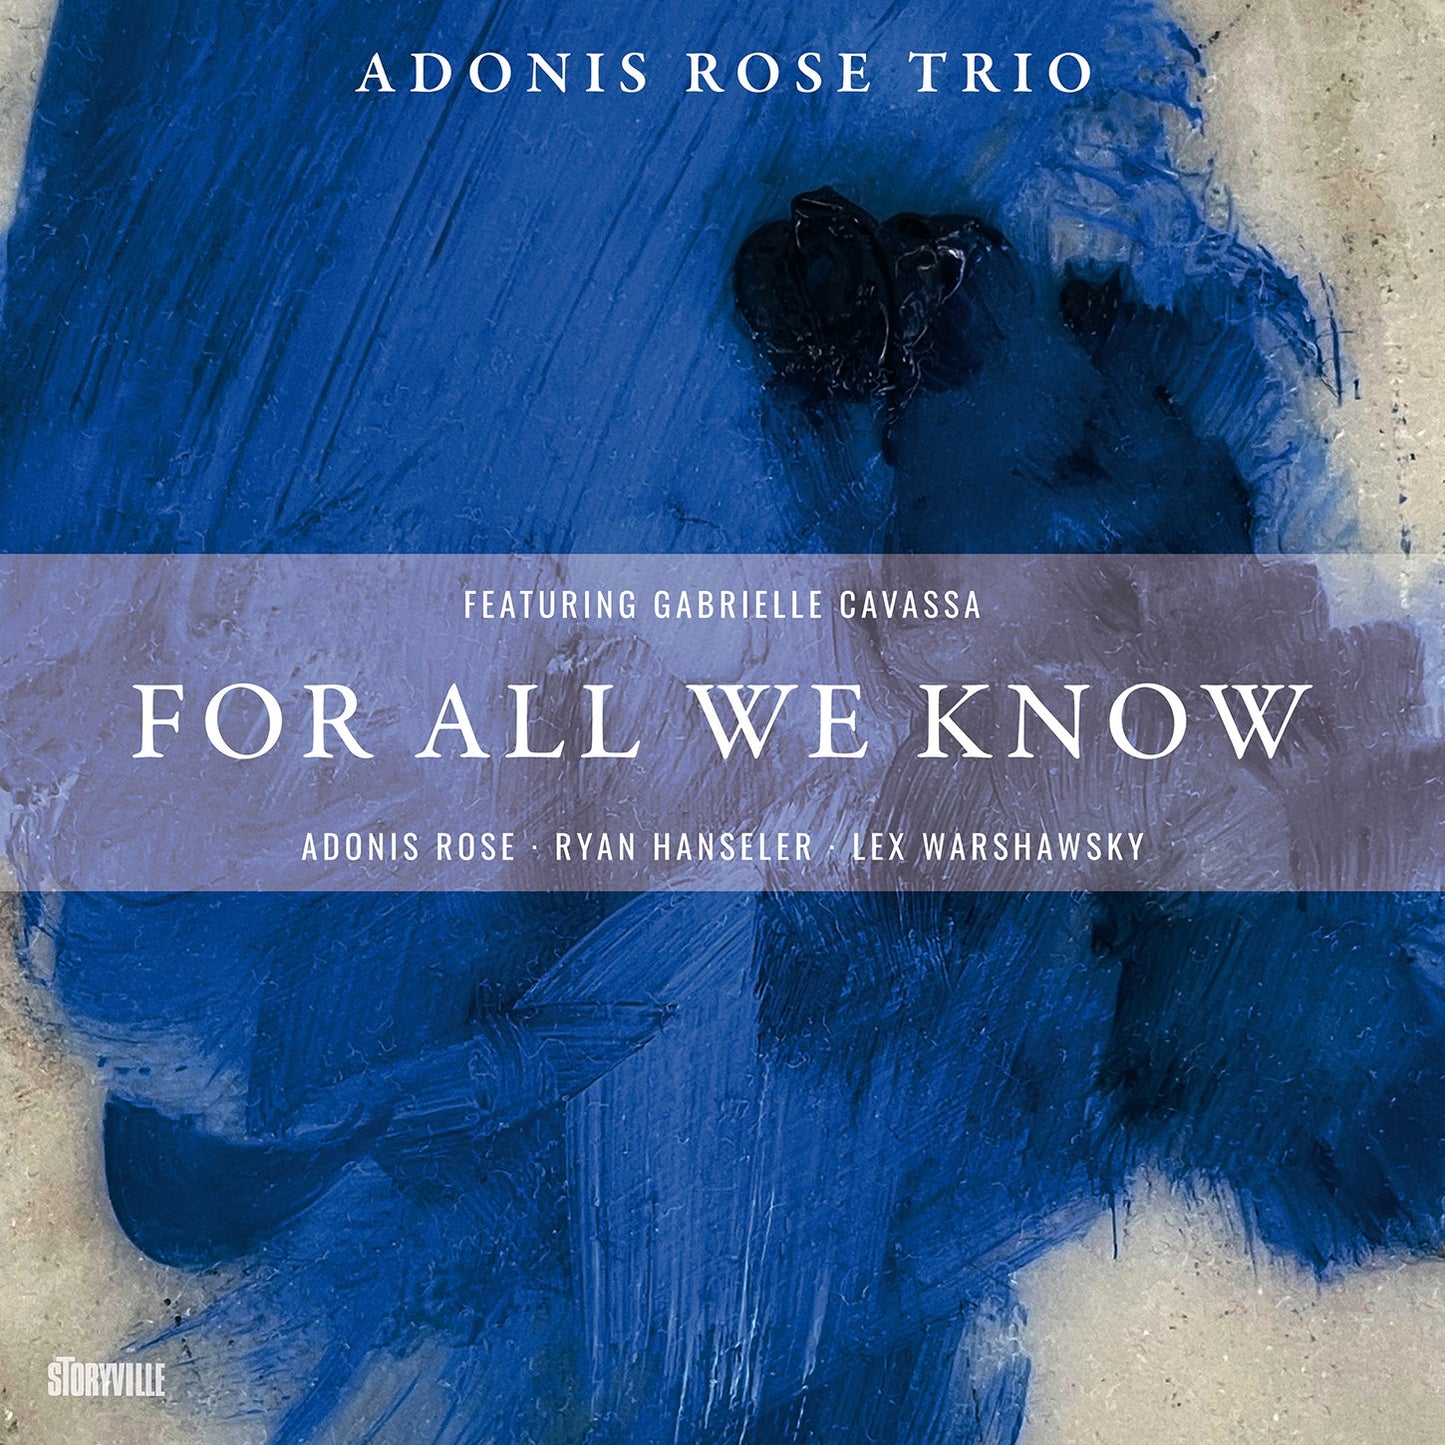 For All We Know / Adonis Rose Trio